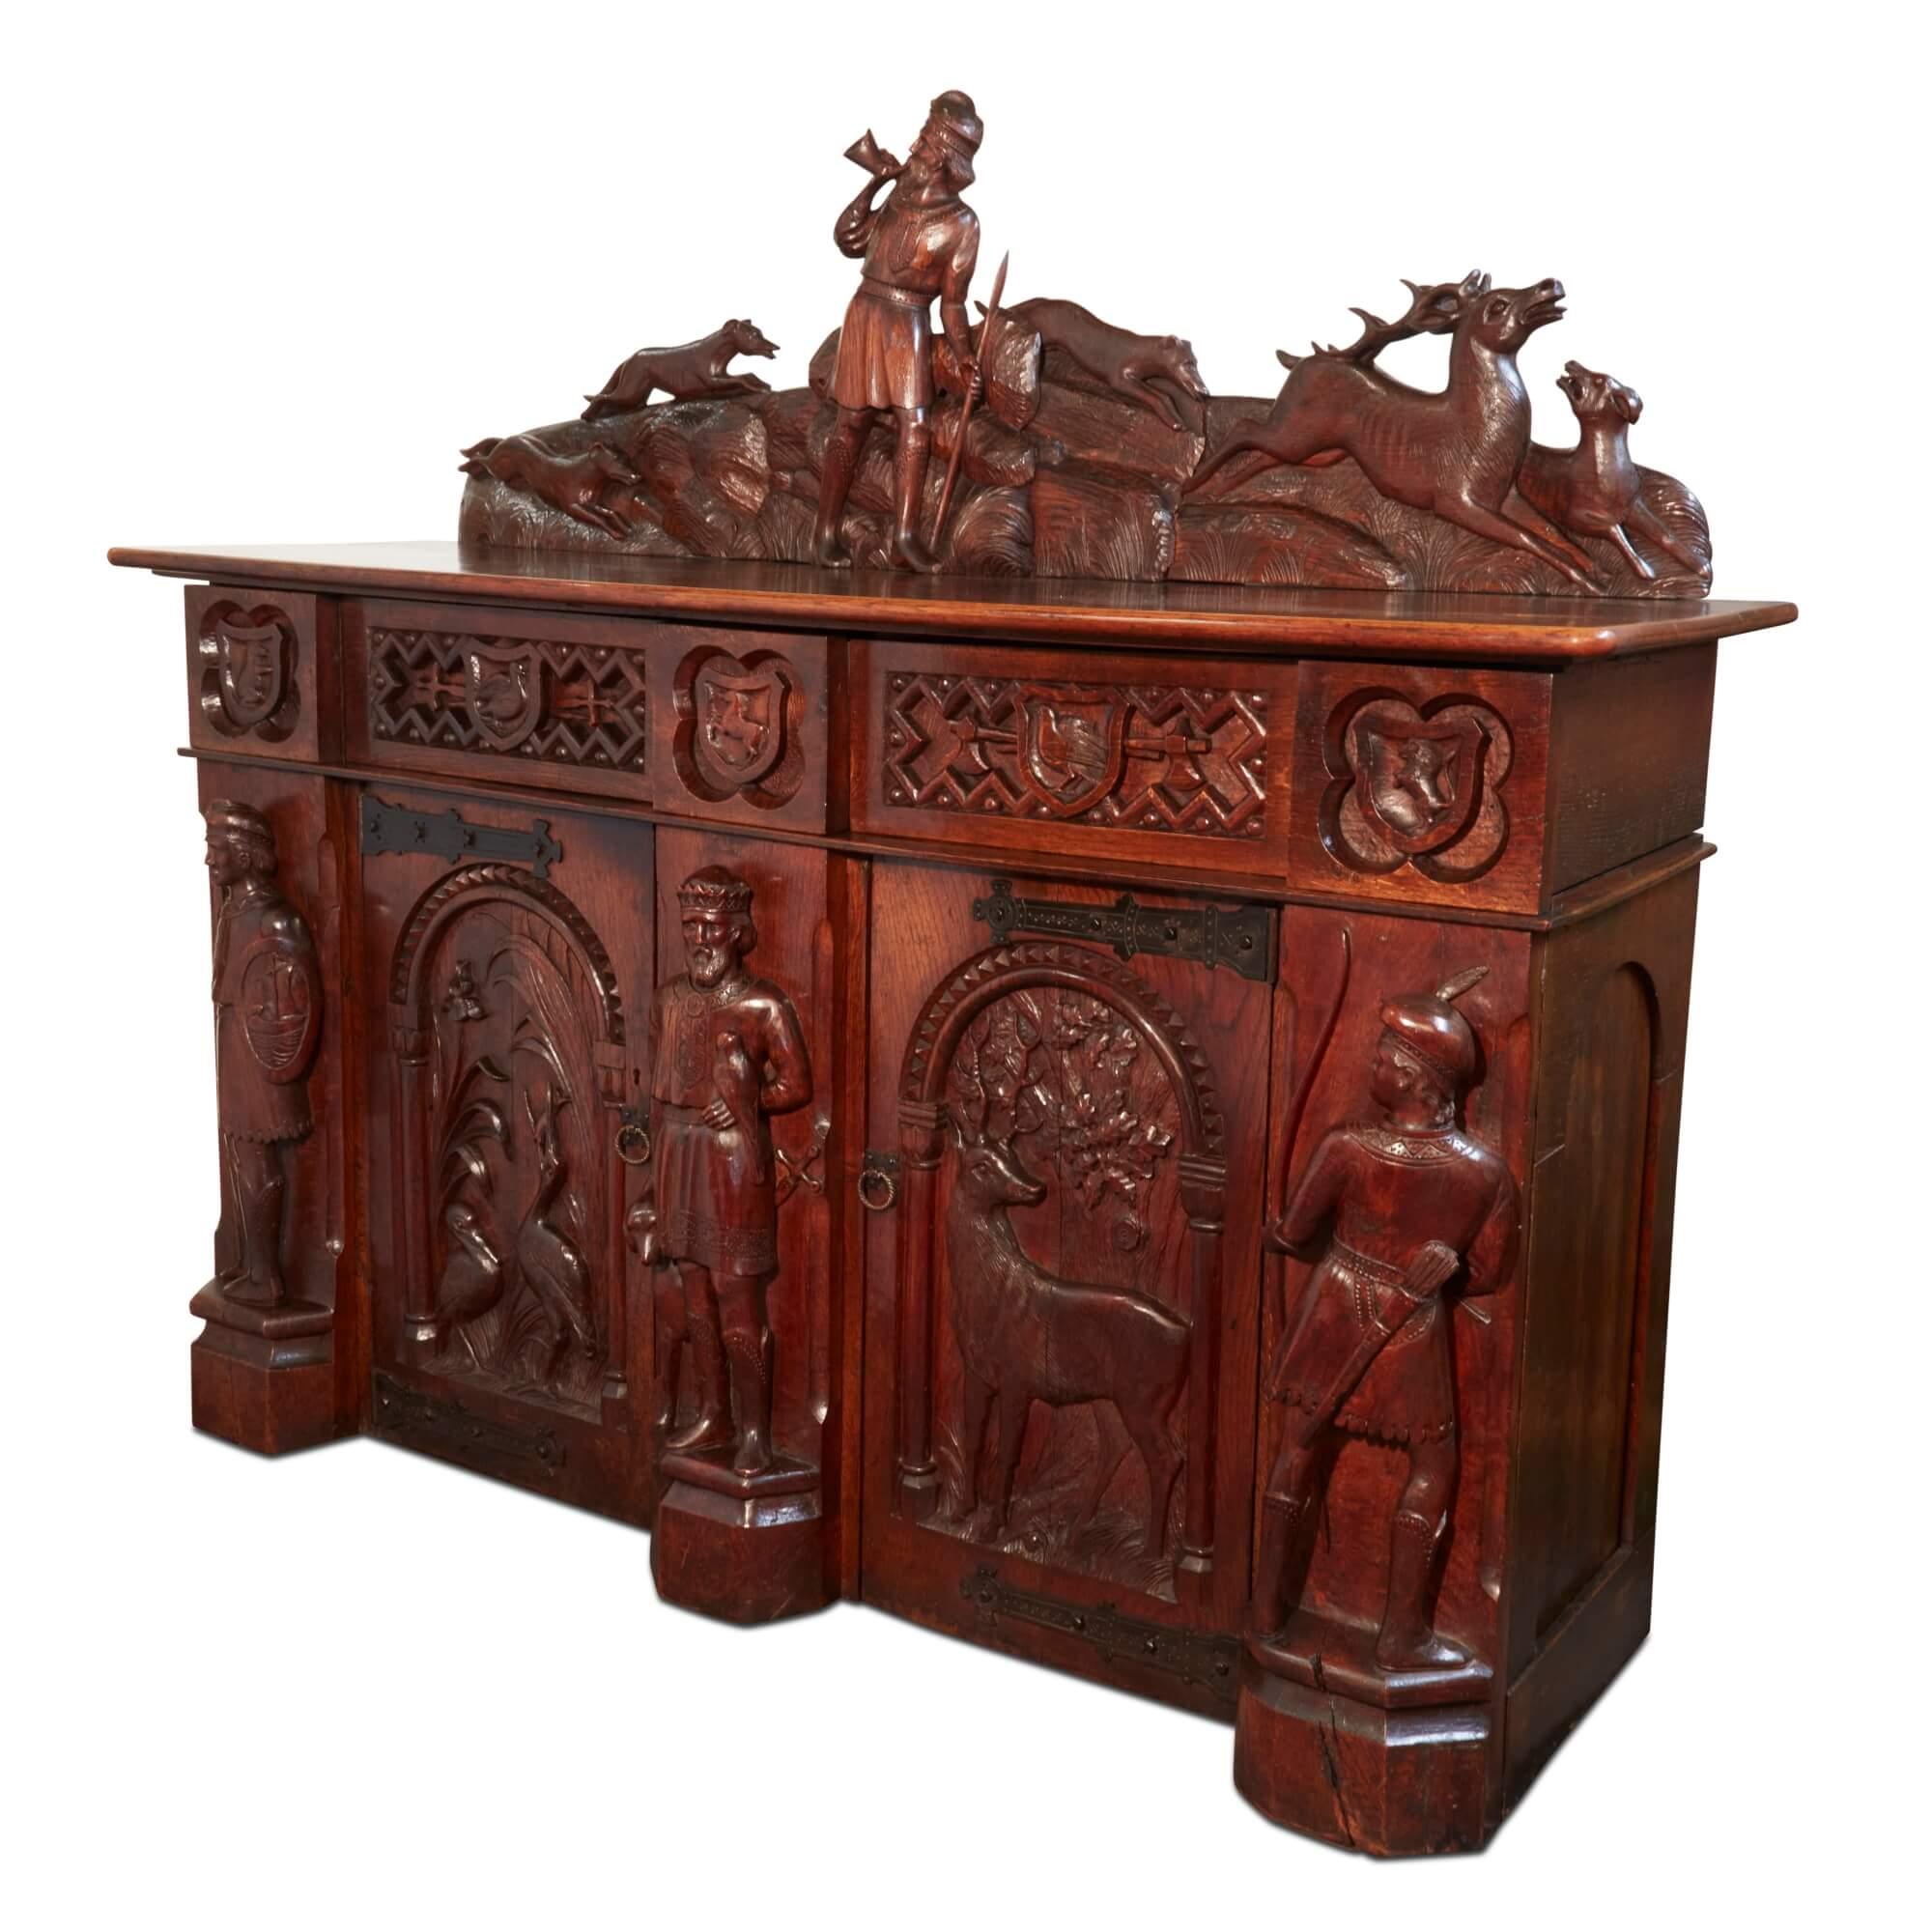 19th century English carved oak cabinet 
English, 19th Century
Height 179cm, width 203cm, depth 62cm

This solid oak cabinet was made in England in the 19th century. It is beautifully carved to depict numerous medieval-style scenes. 

The top of the